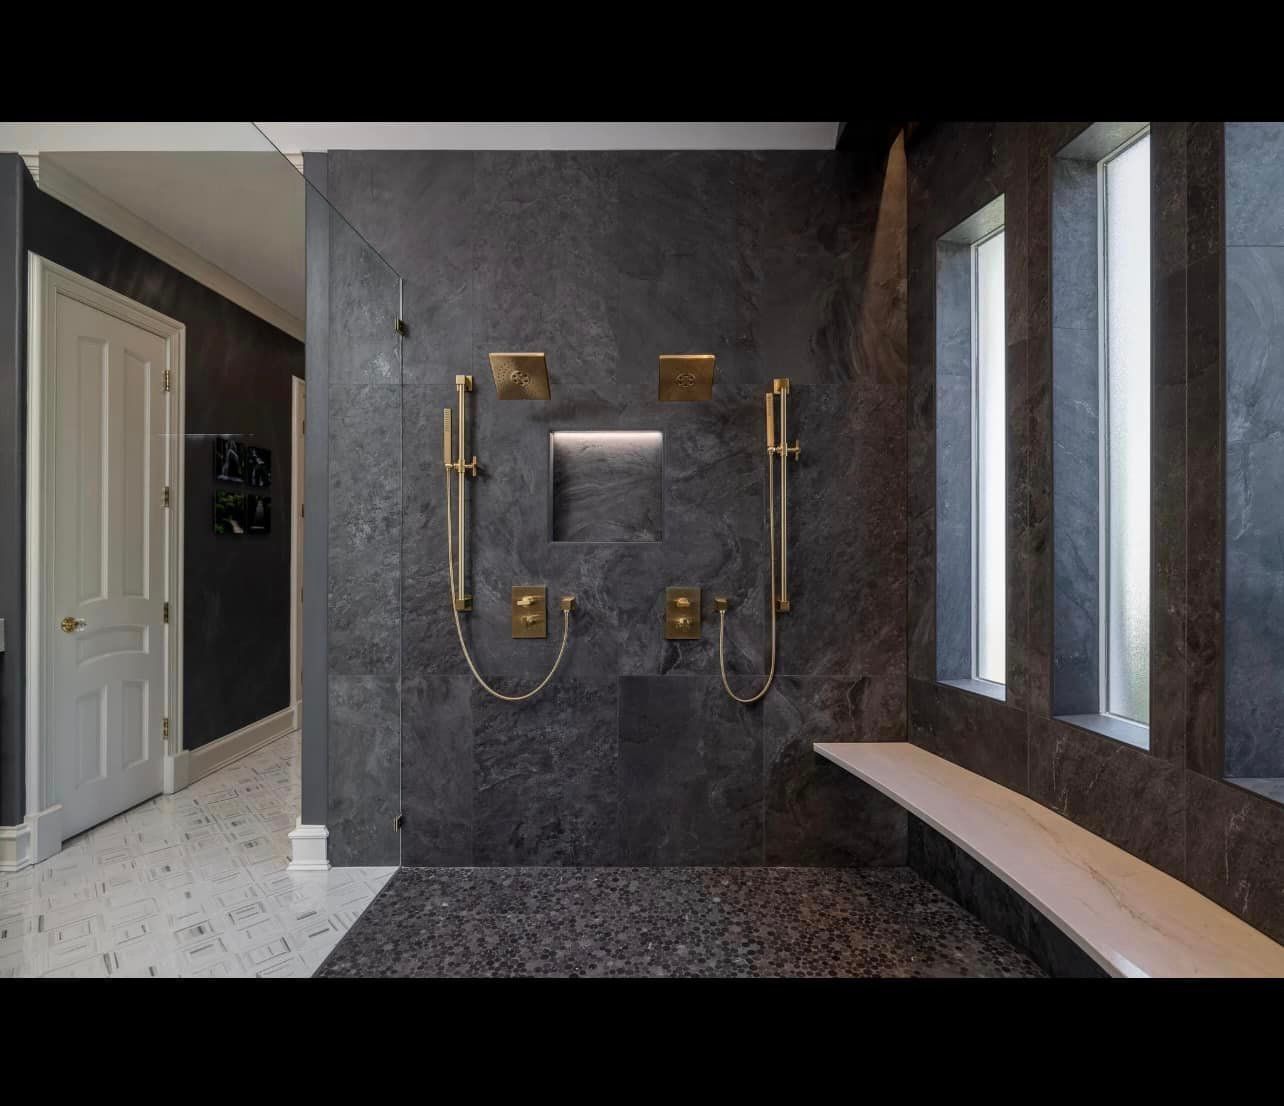 Luxurious Bathroom with Custom Illuminiche Niche and Gold Fixtures